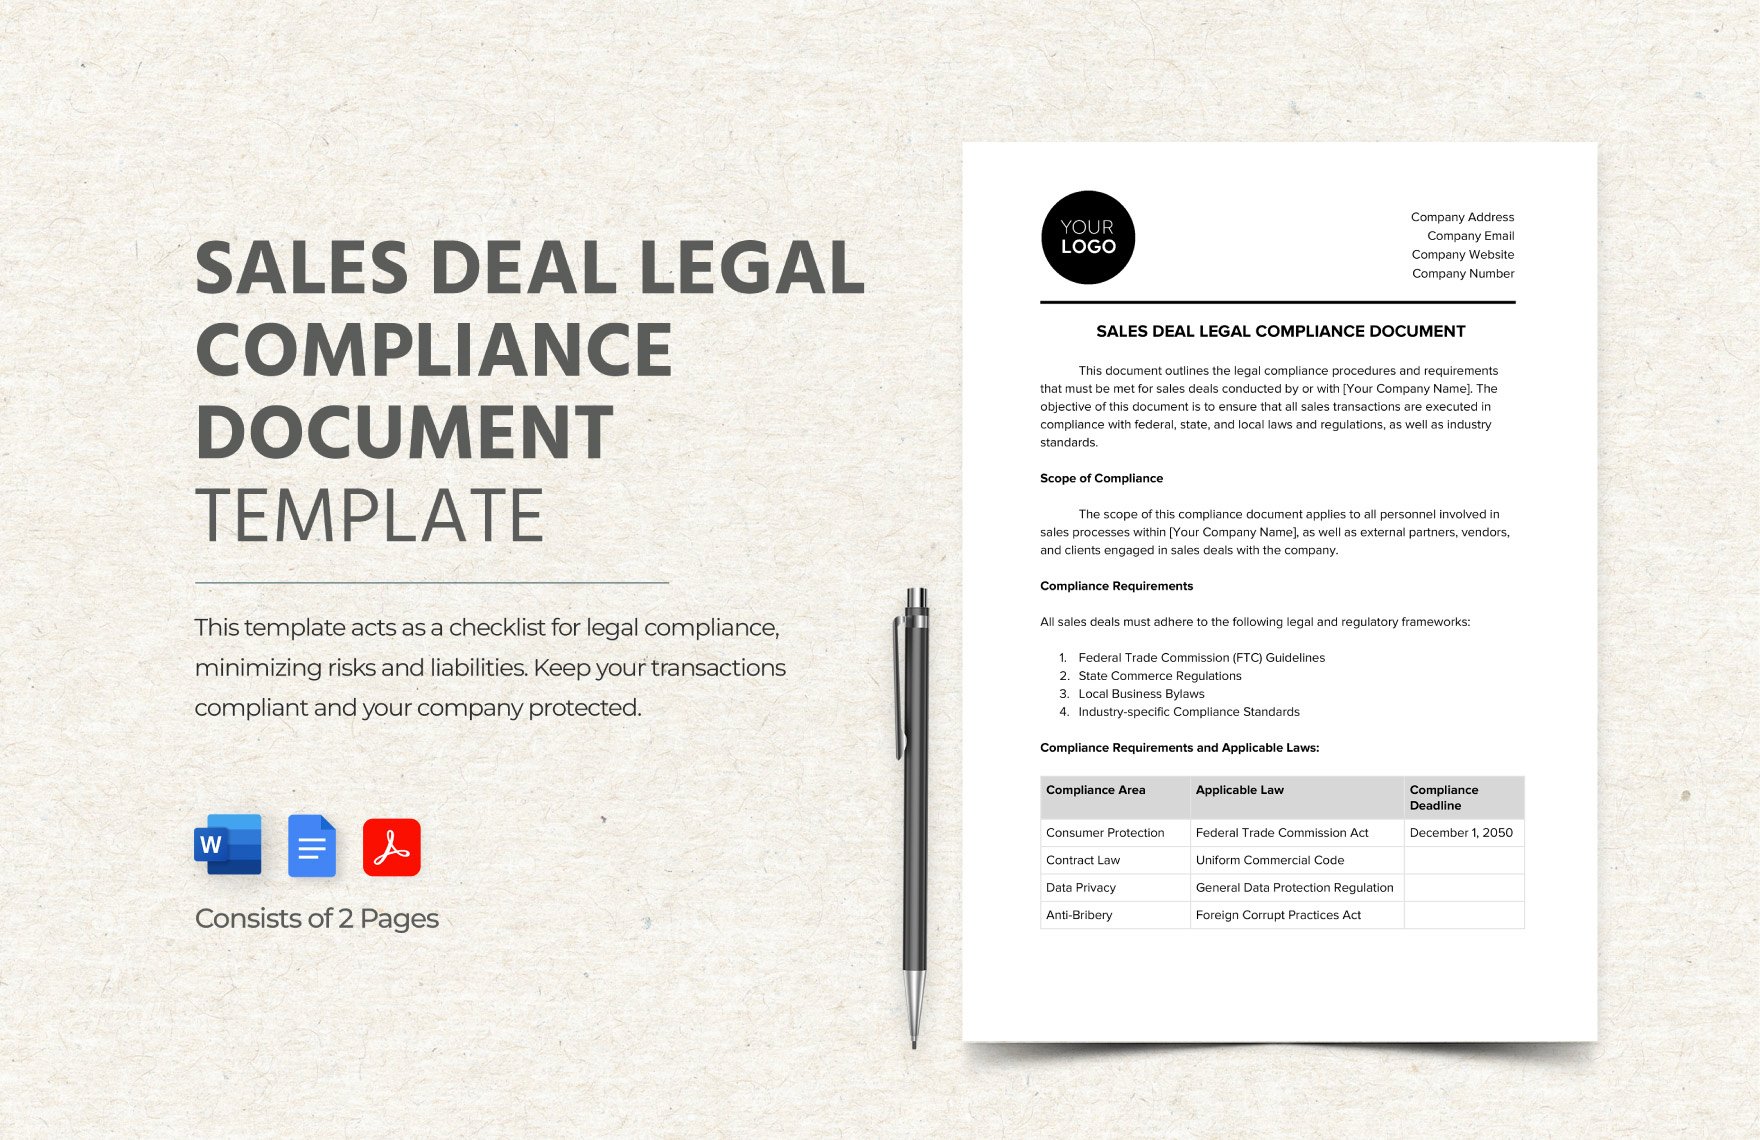 Sales Deal Legal Compliance Document Template in Word, Google Docs, PDF